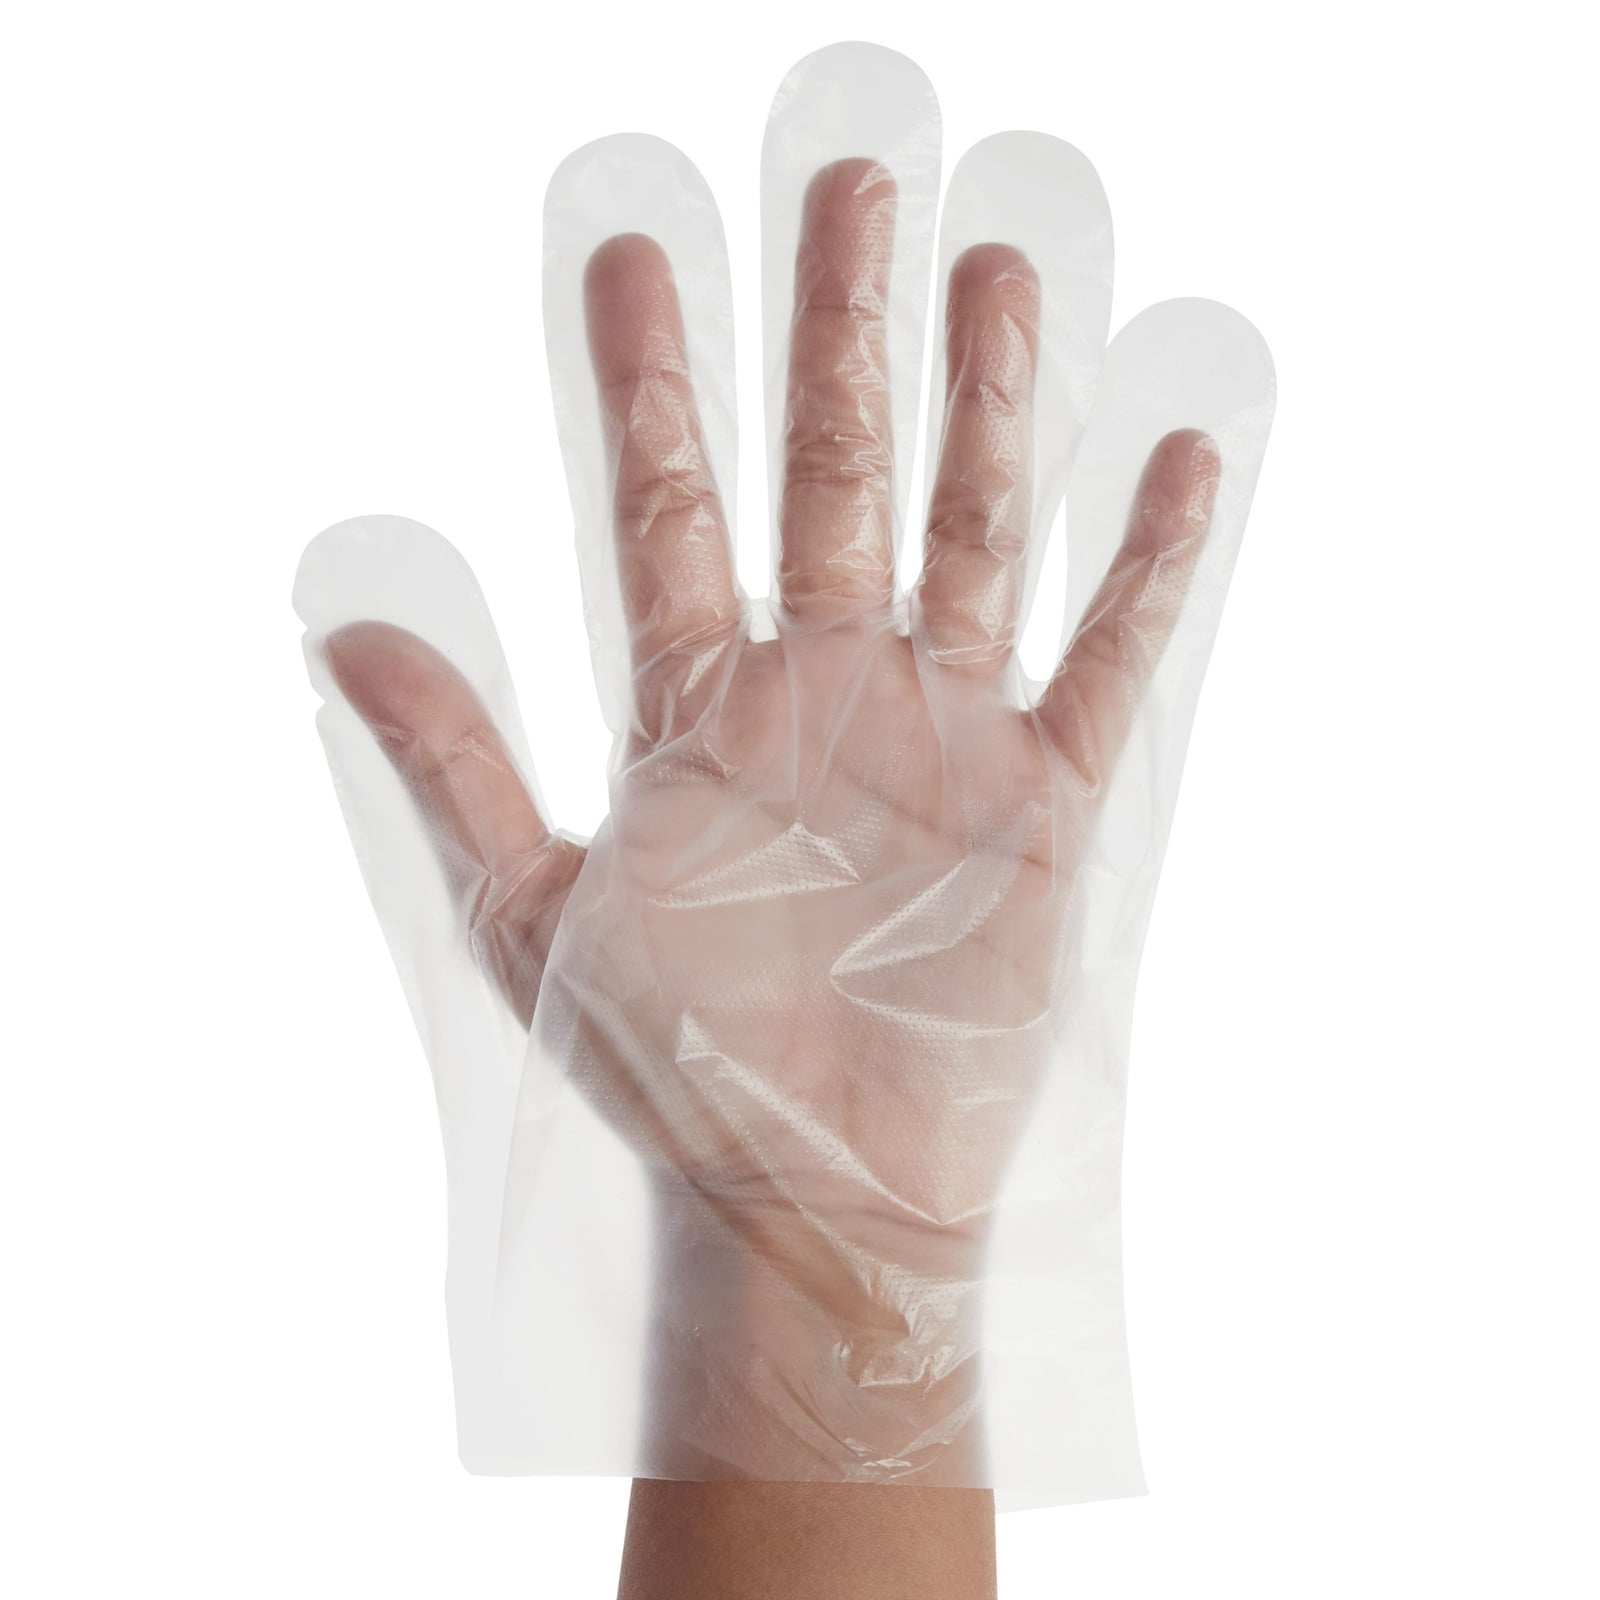 1 Size Fits Most, Disposable Food Handling Elbow Length Poly Gloves - 100  per Box (1-Box)